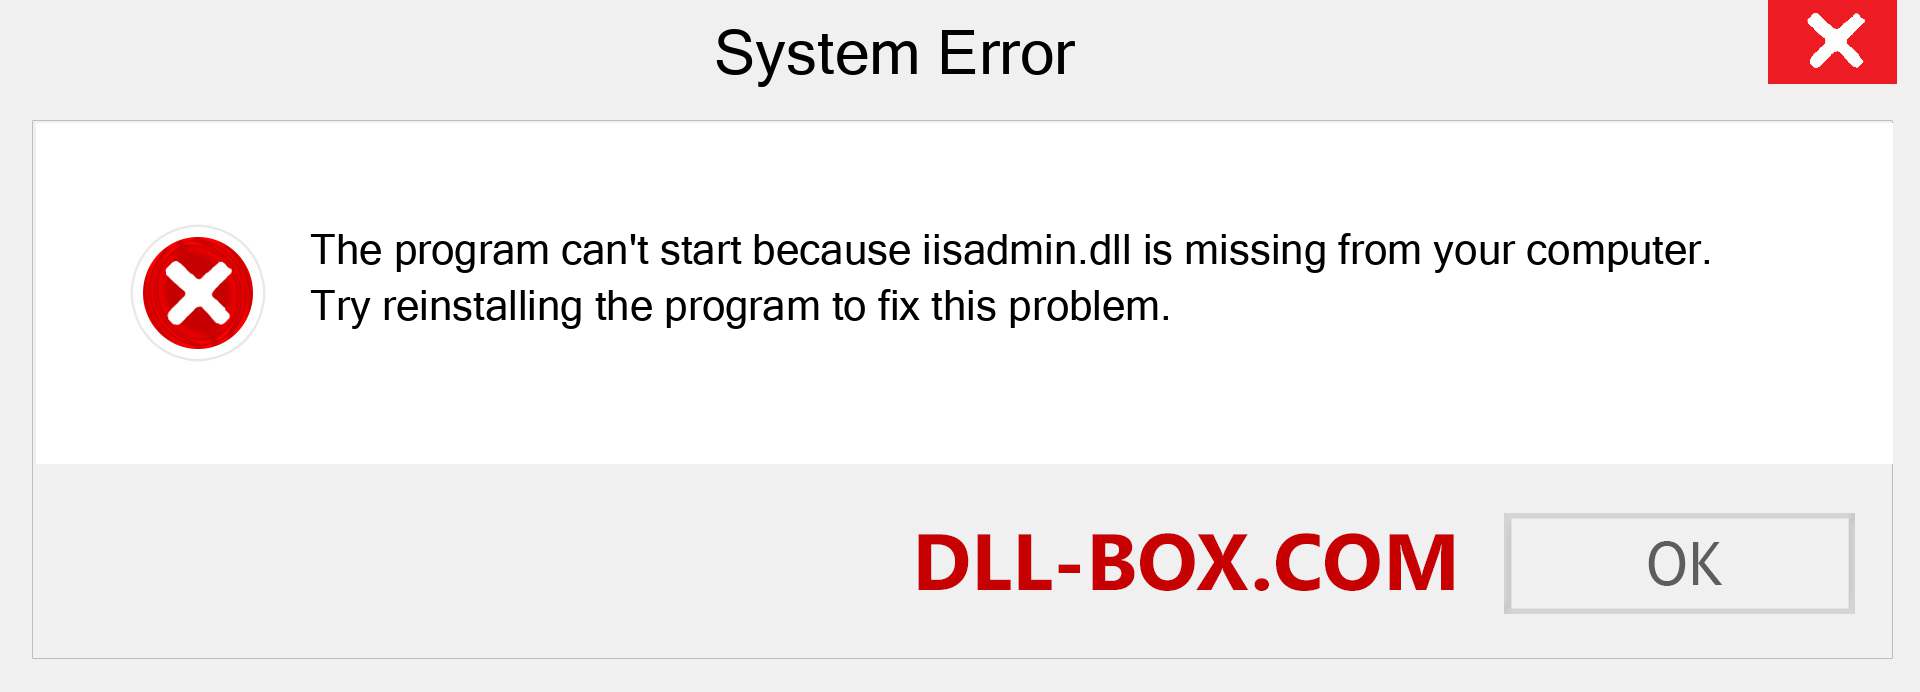  iisadmin.dll file is missing?. Download for Windows 7, 8, 10 - Fix  iisadmin dll Missing Error on Windows, photos, images